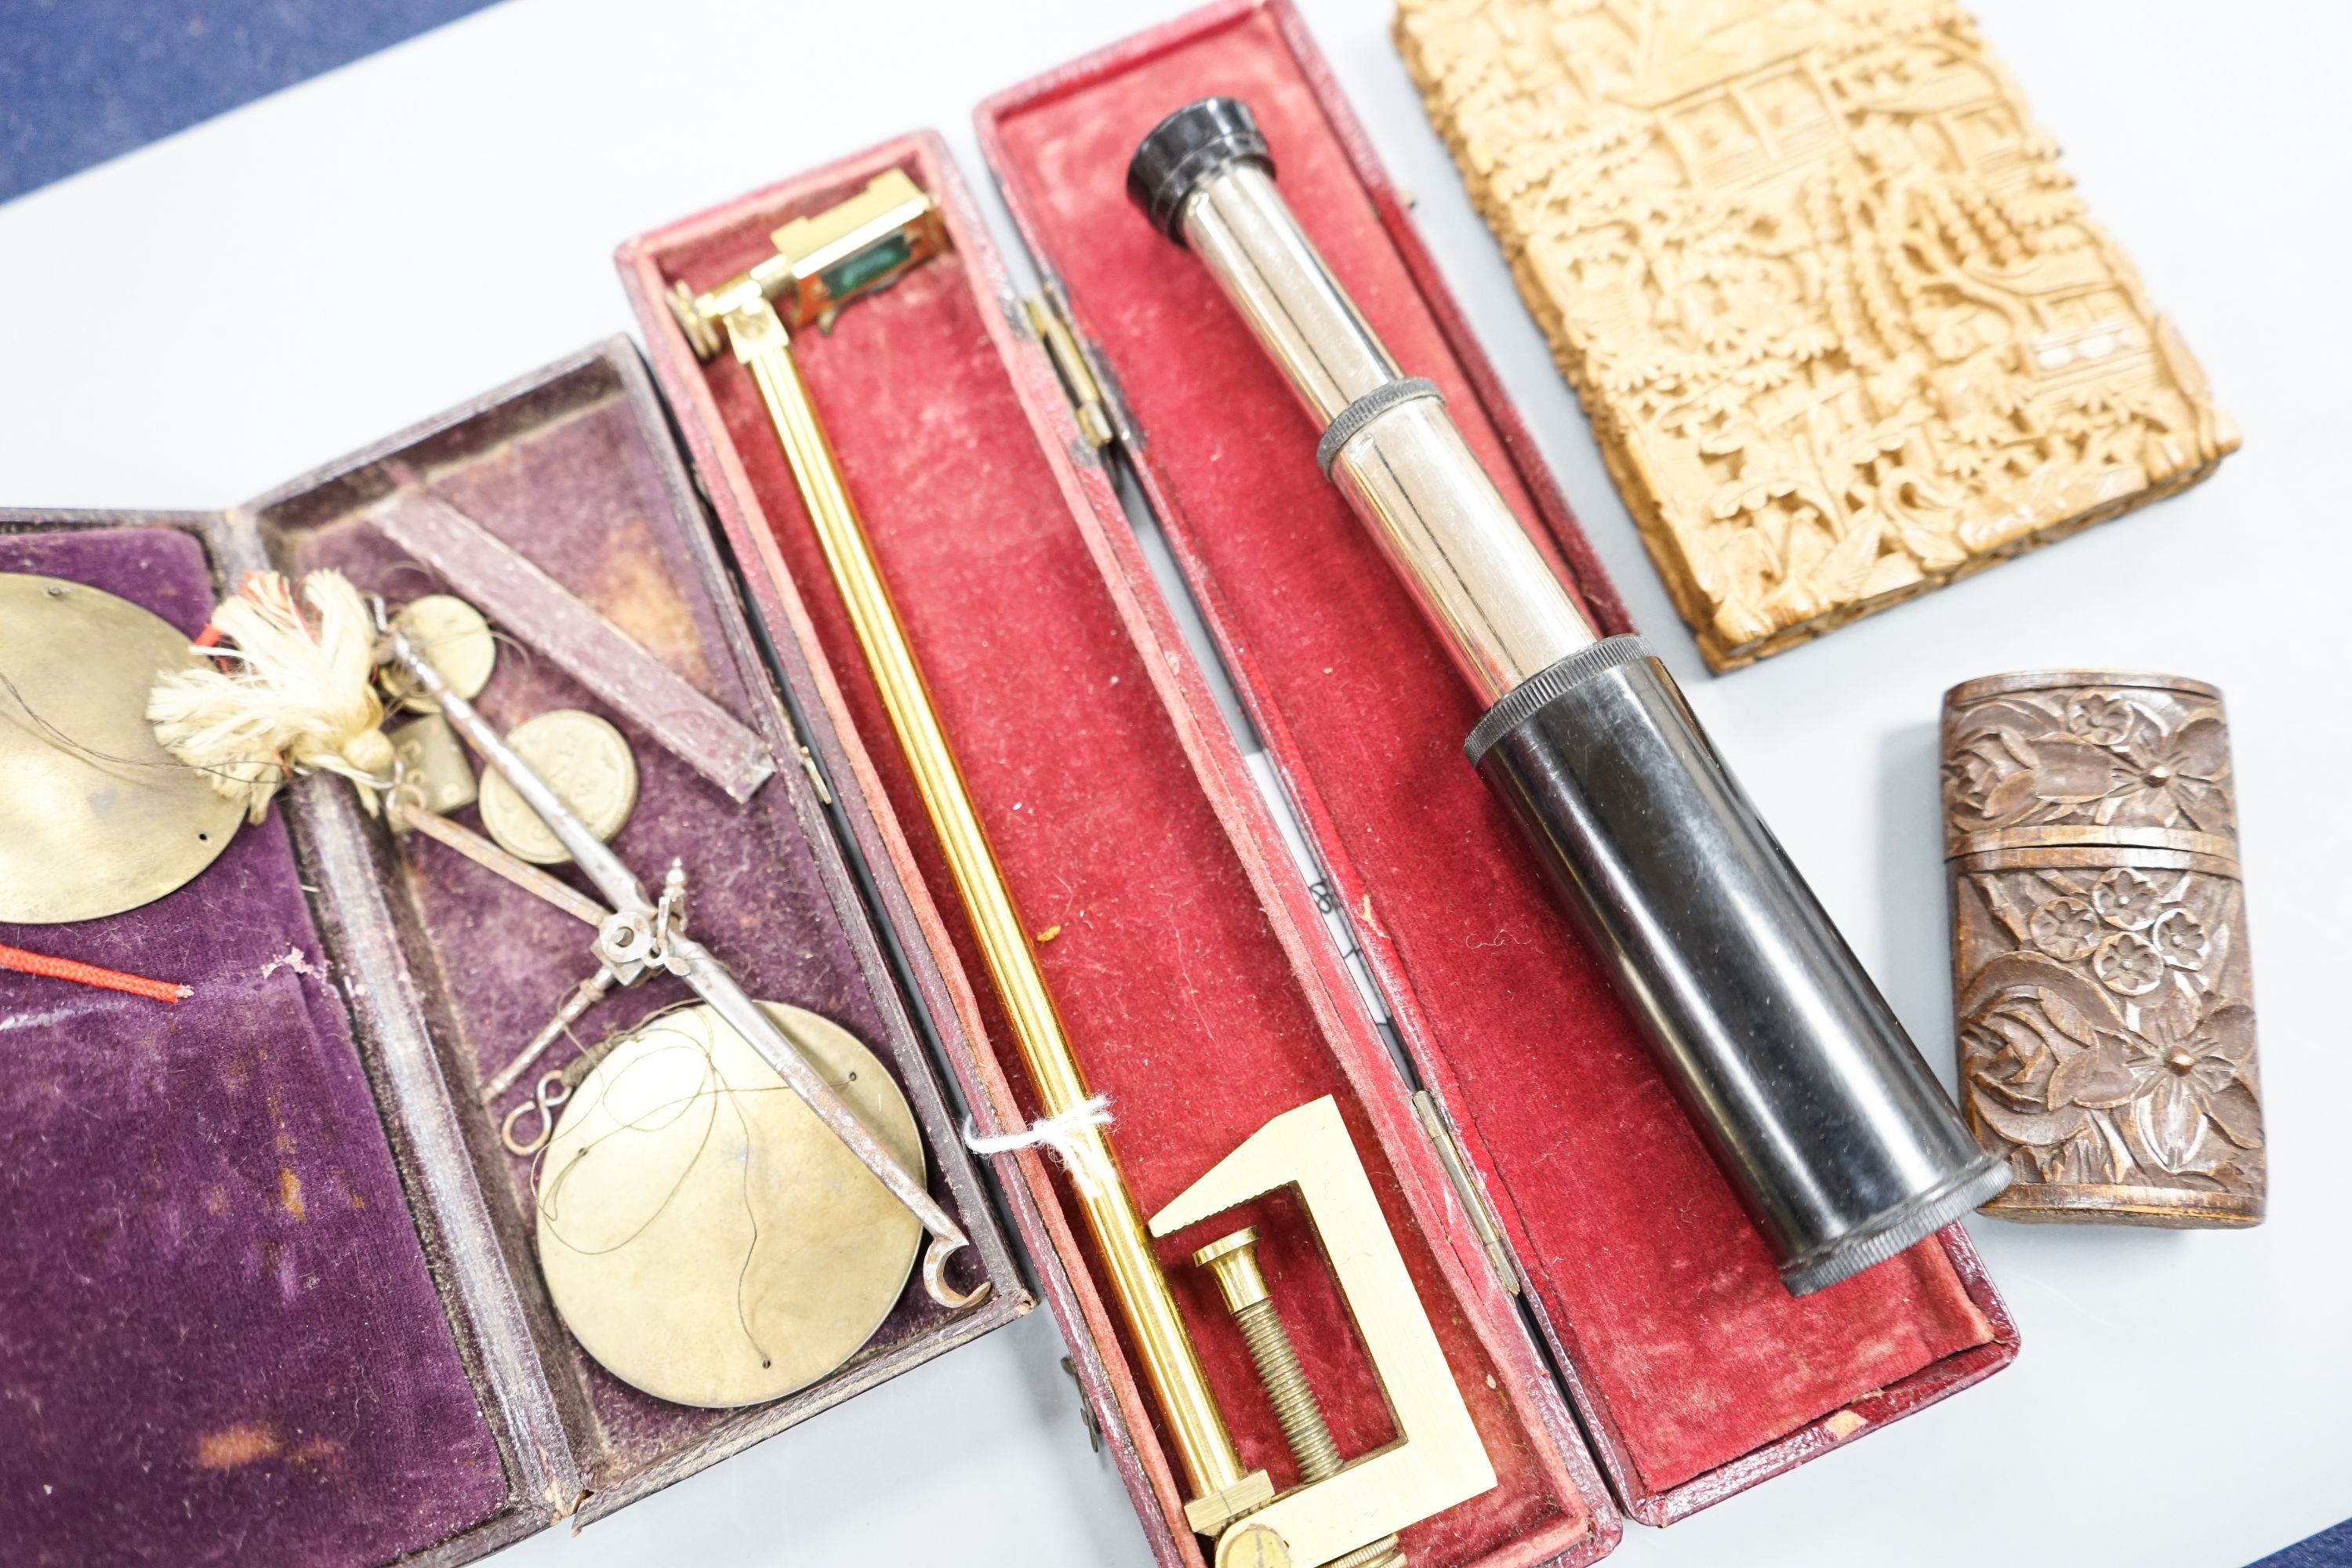 A Chinese carved sandalwood card case, a cased set of Avery gold scales, a Zonex telescope, a cased Cary prismatic instrument and a floral carved wood box.